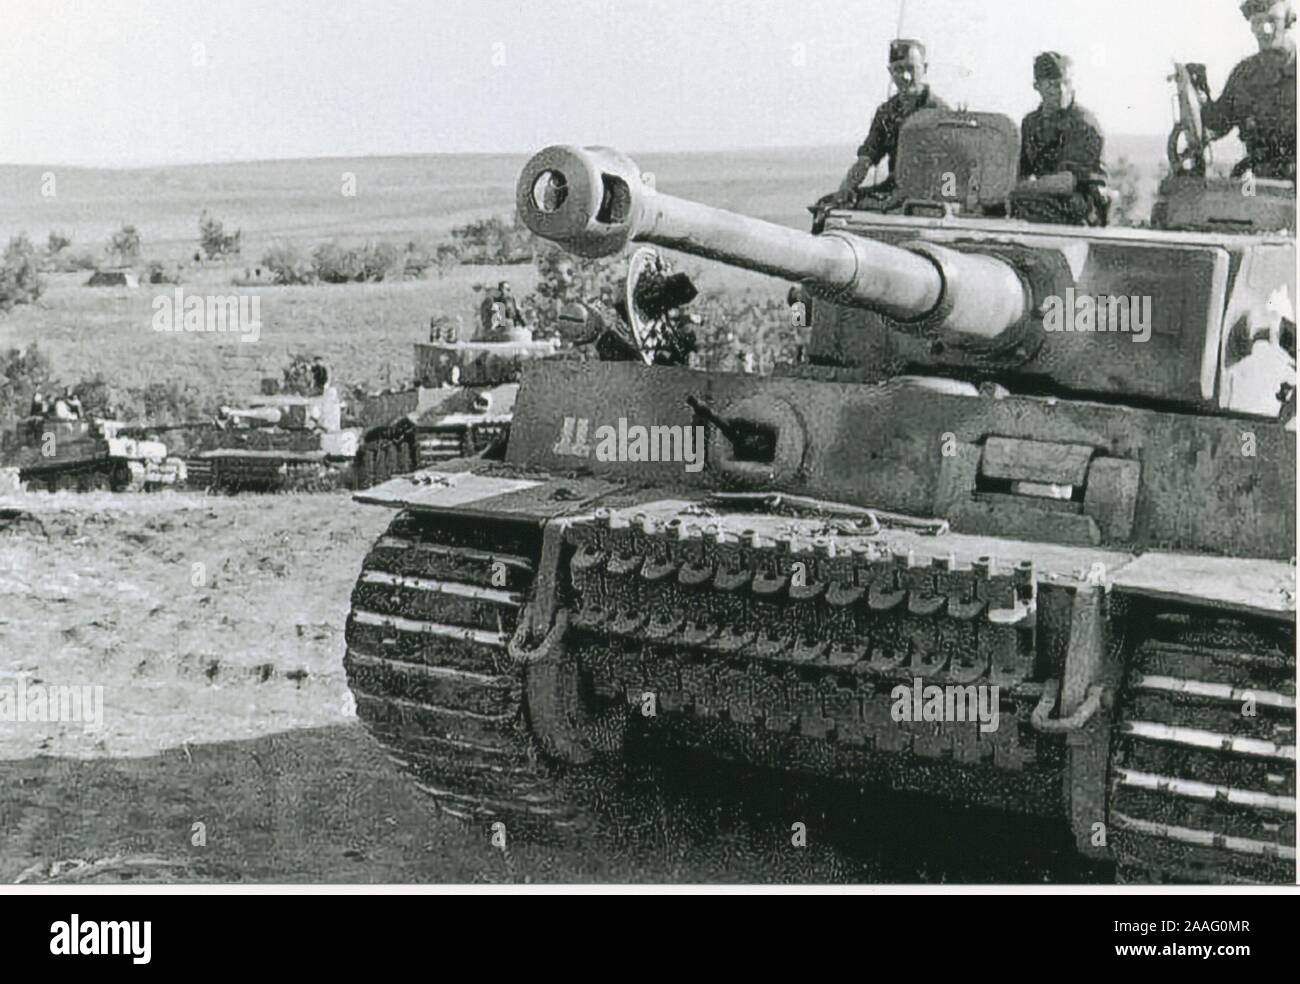 German Tiger Tank of the 2nd SS Panzer Division at Kursk on the Russian Front 1943 Stock Photo